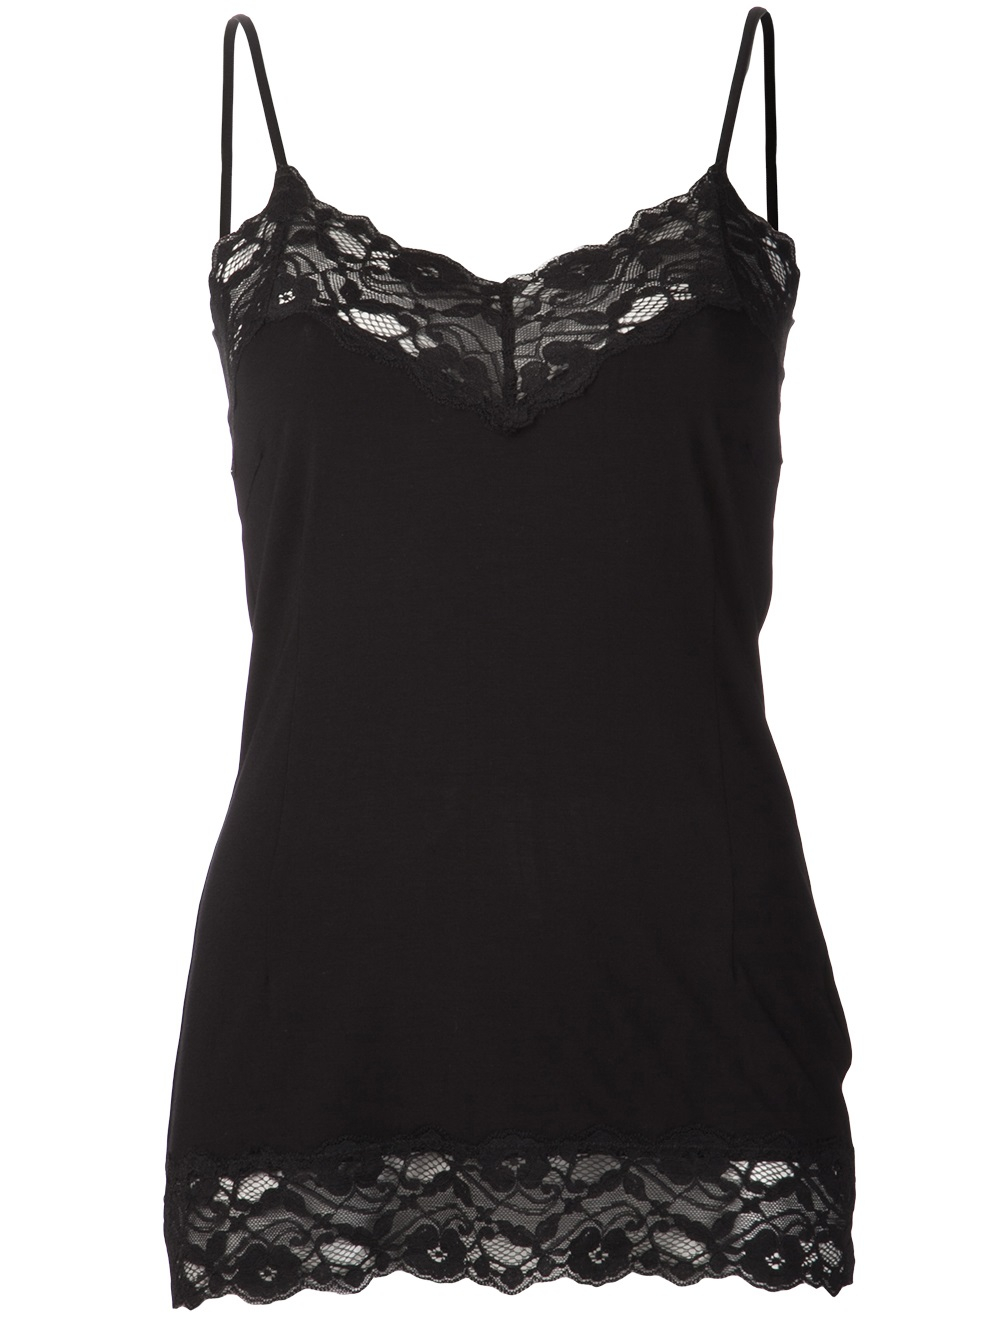 Lyst - Allude Lace Cami in Black